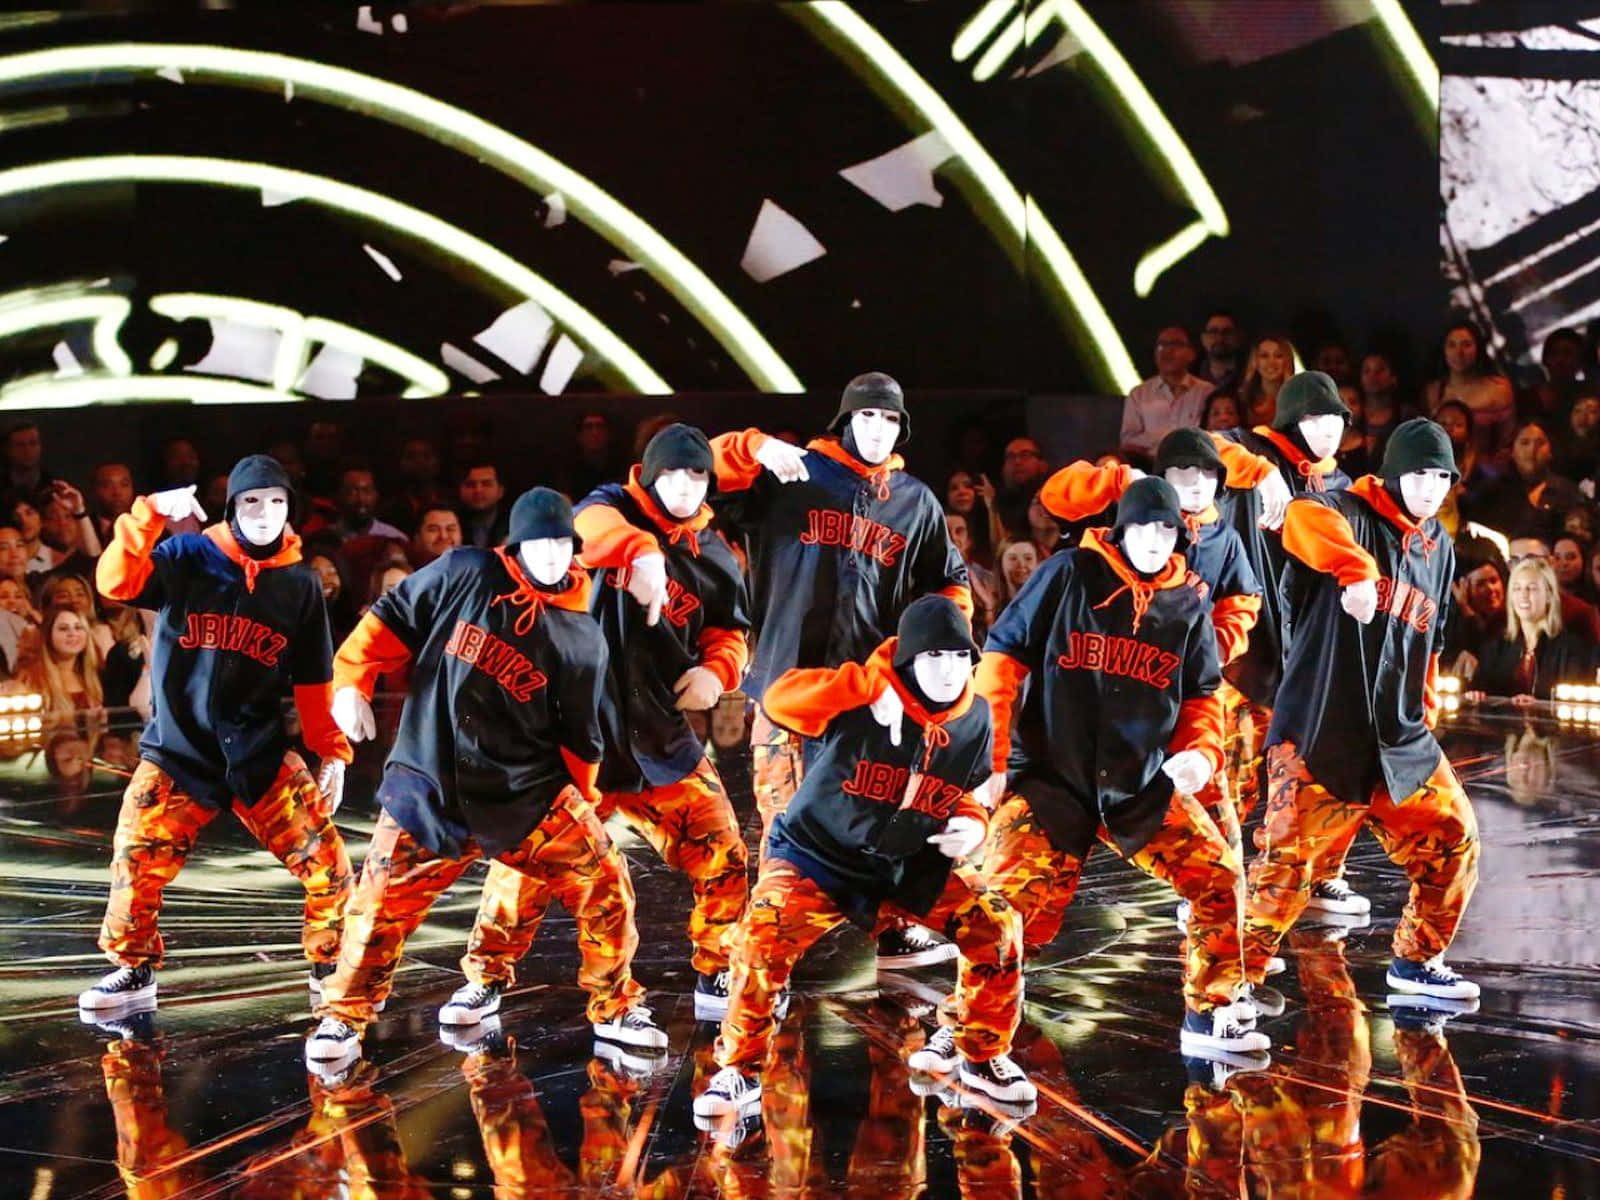 A Group Of Dancers In Orange And Black Outfits